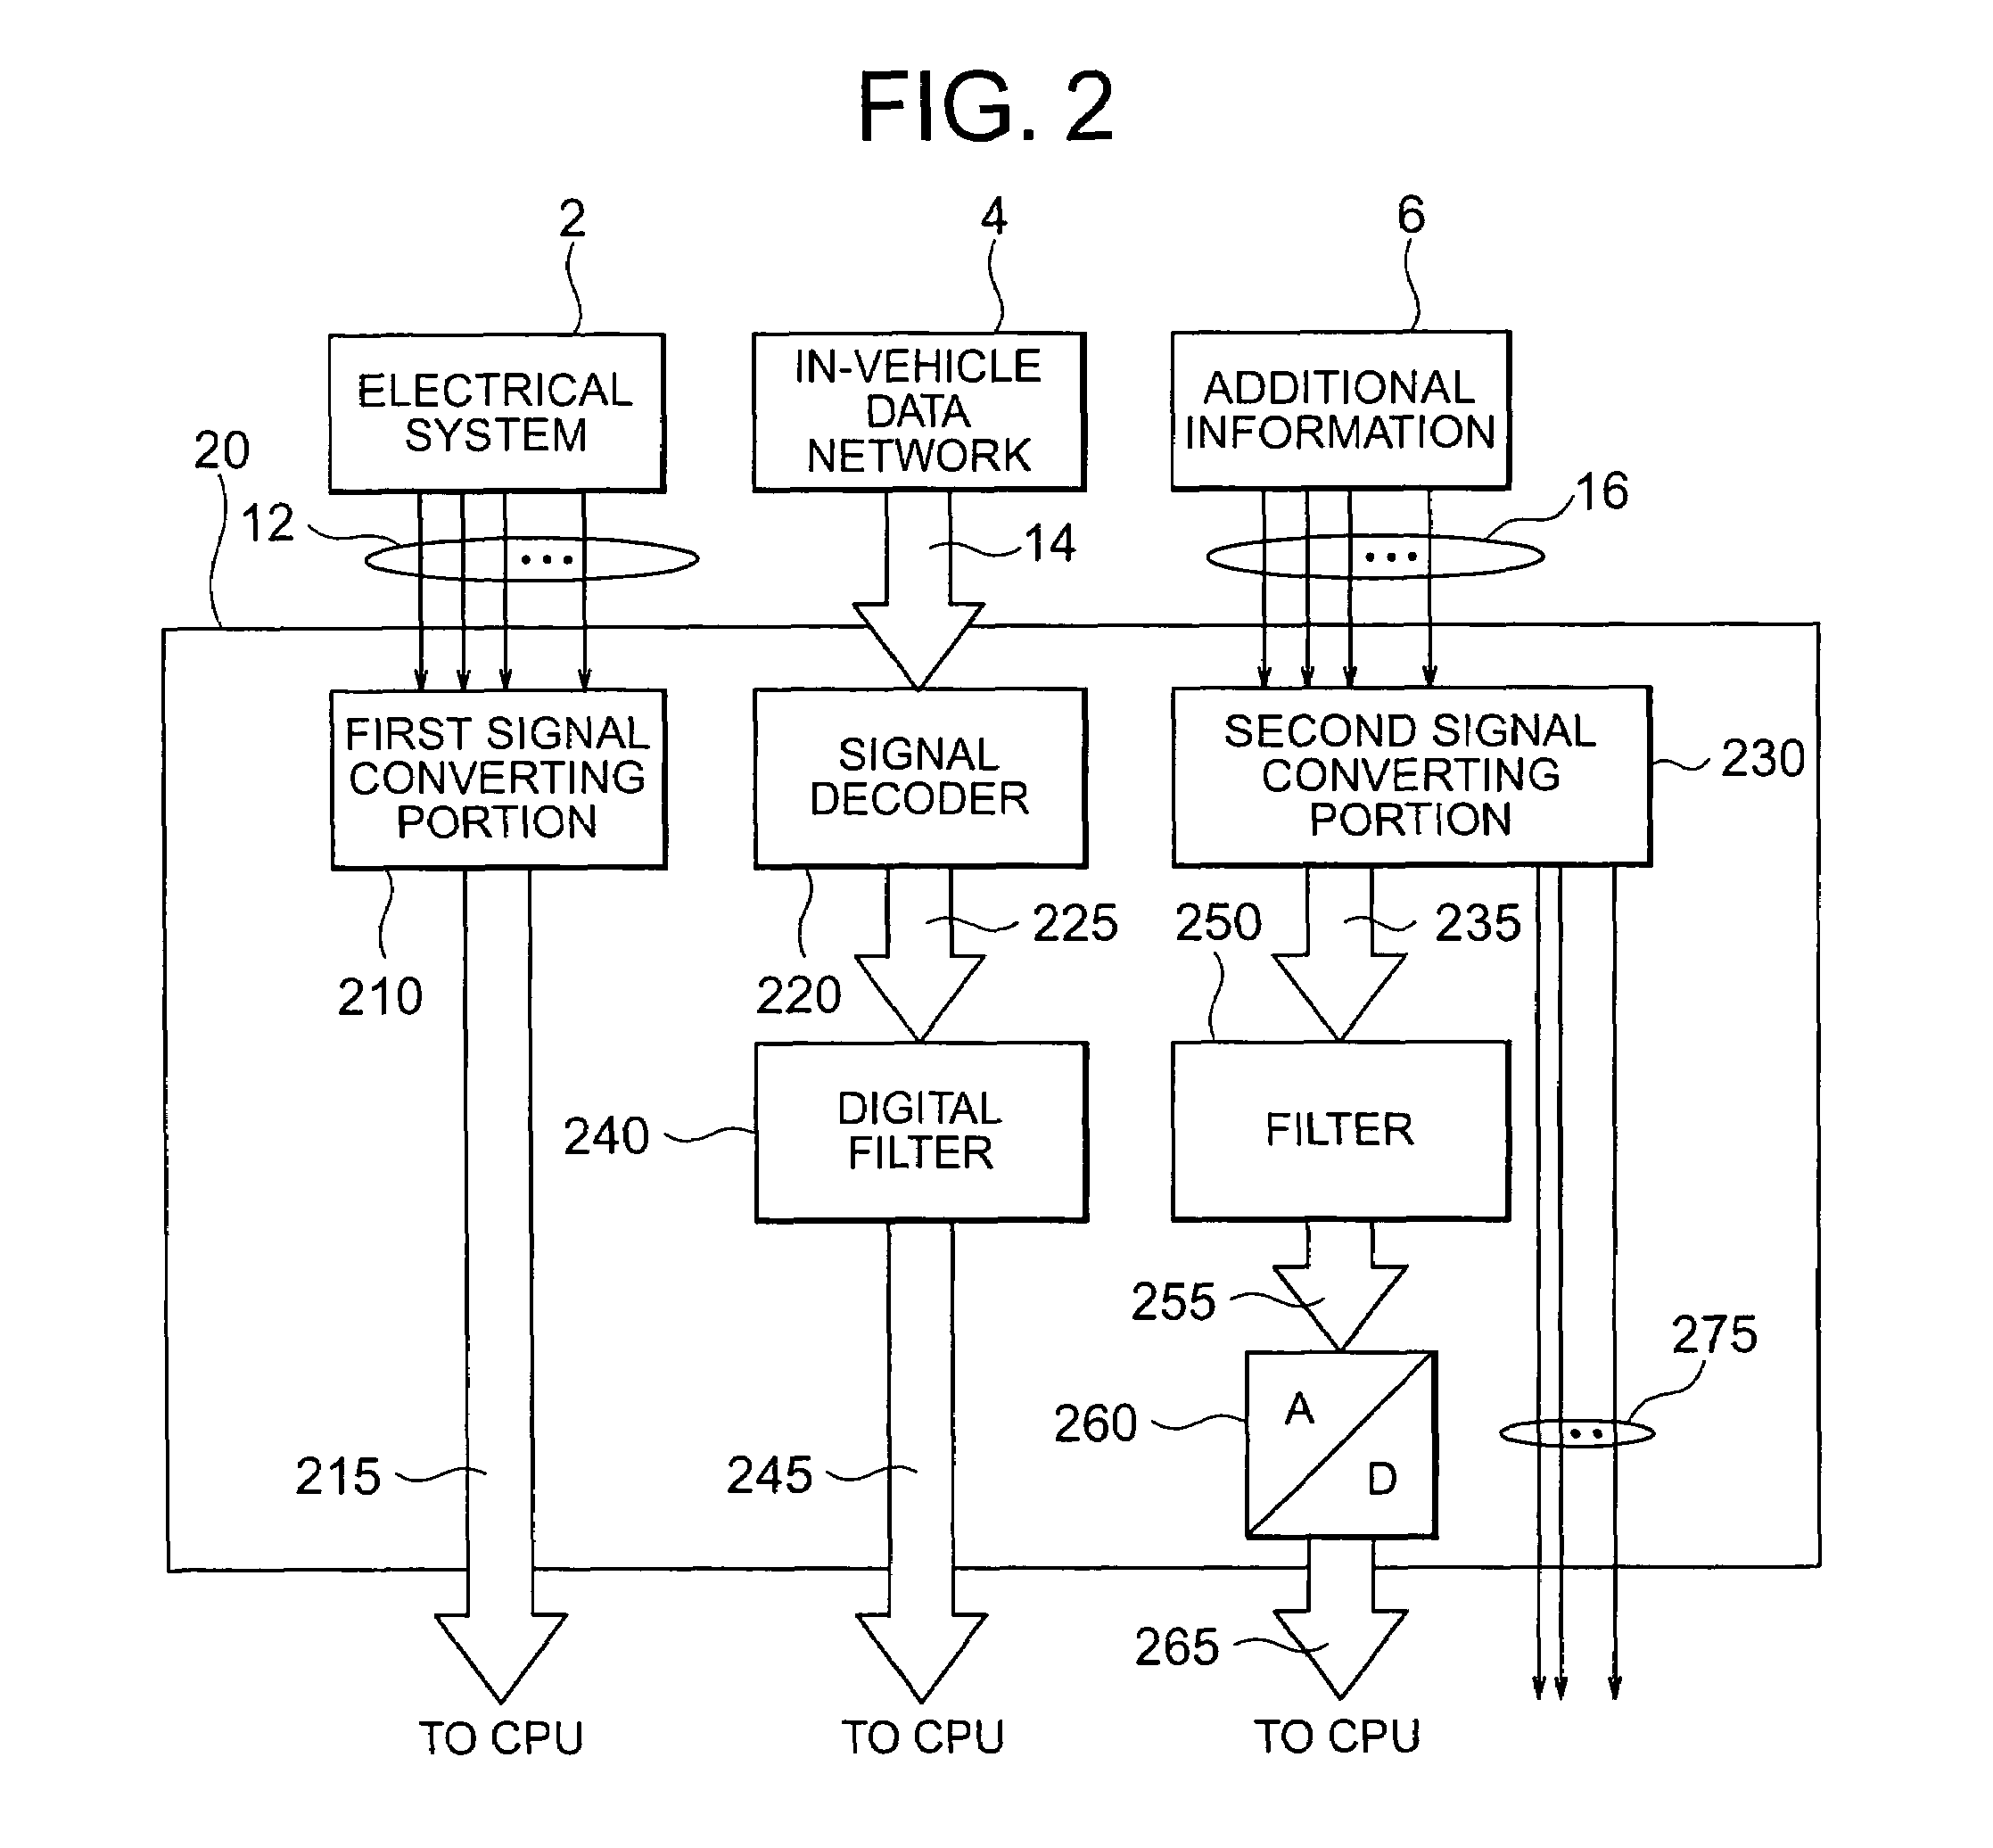 System for analyzing vehicle and driver behavior